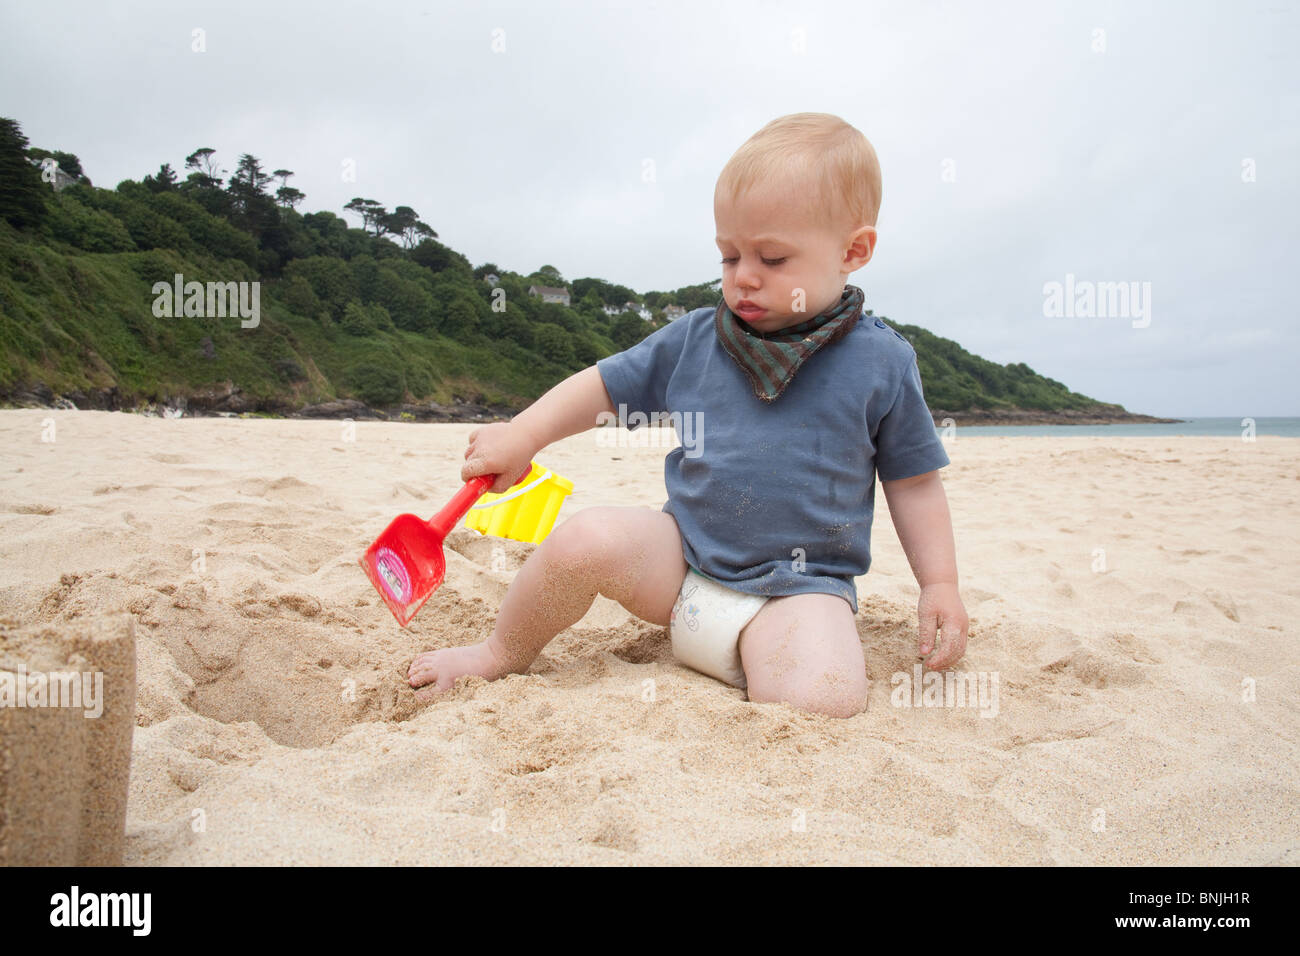 Little Boy Playing On The Beach Stock Photo - Image of 